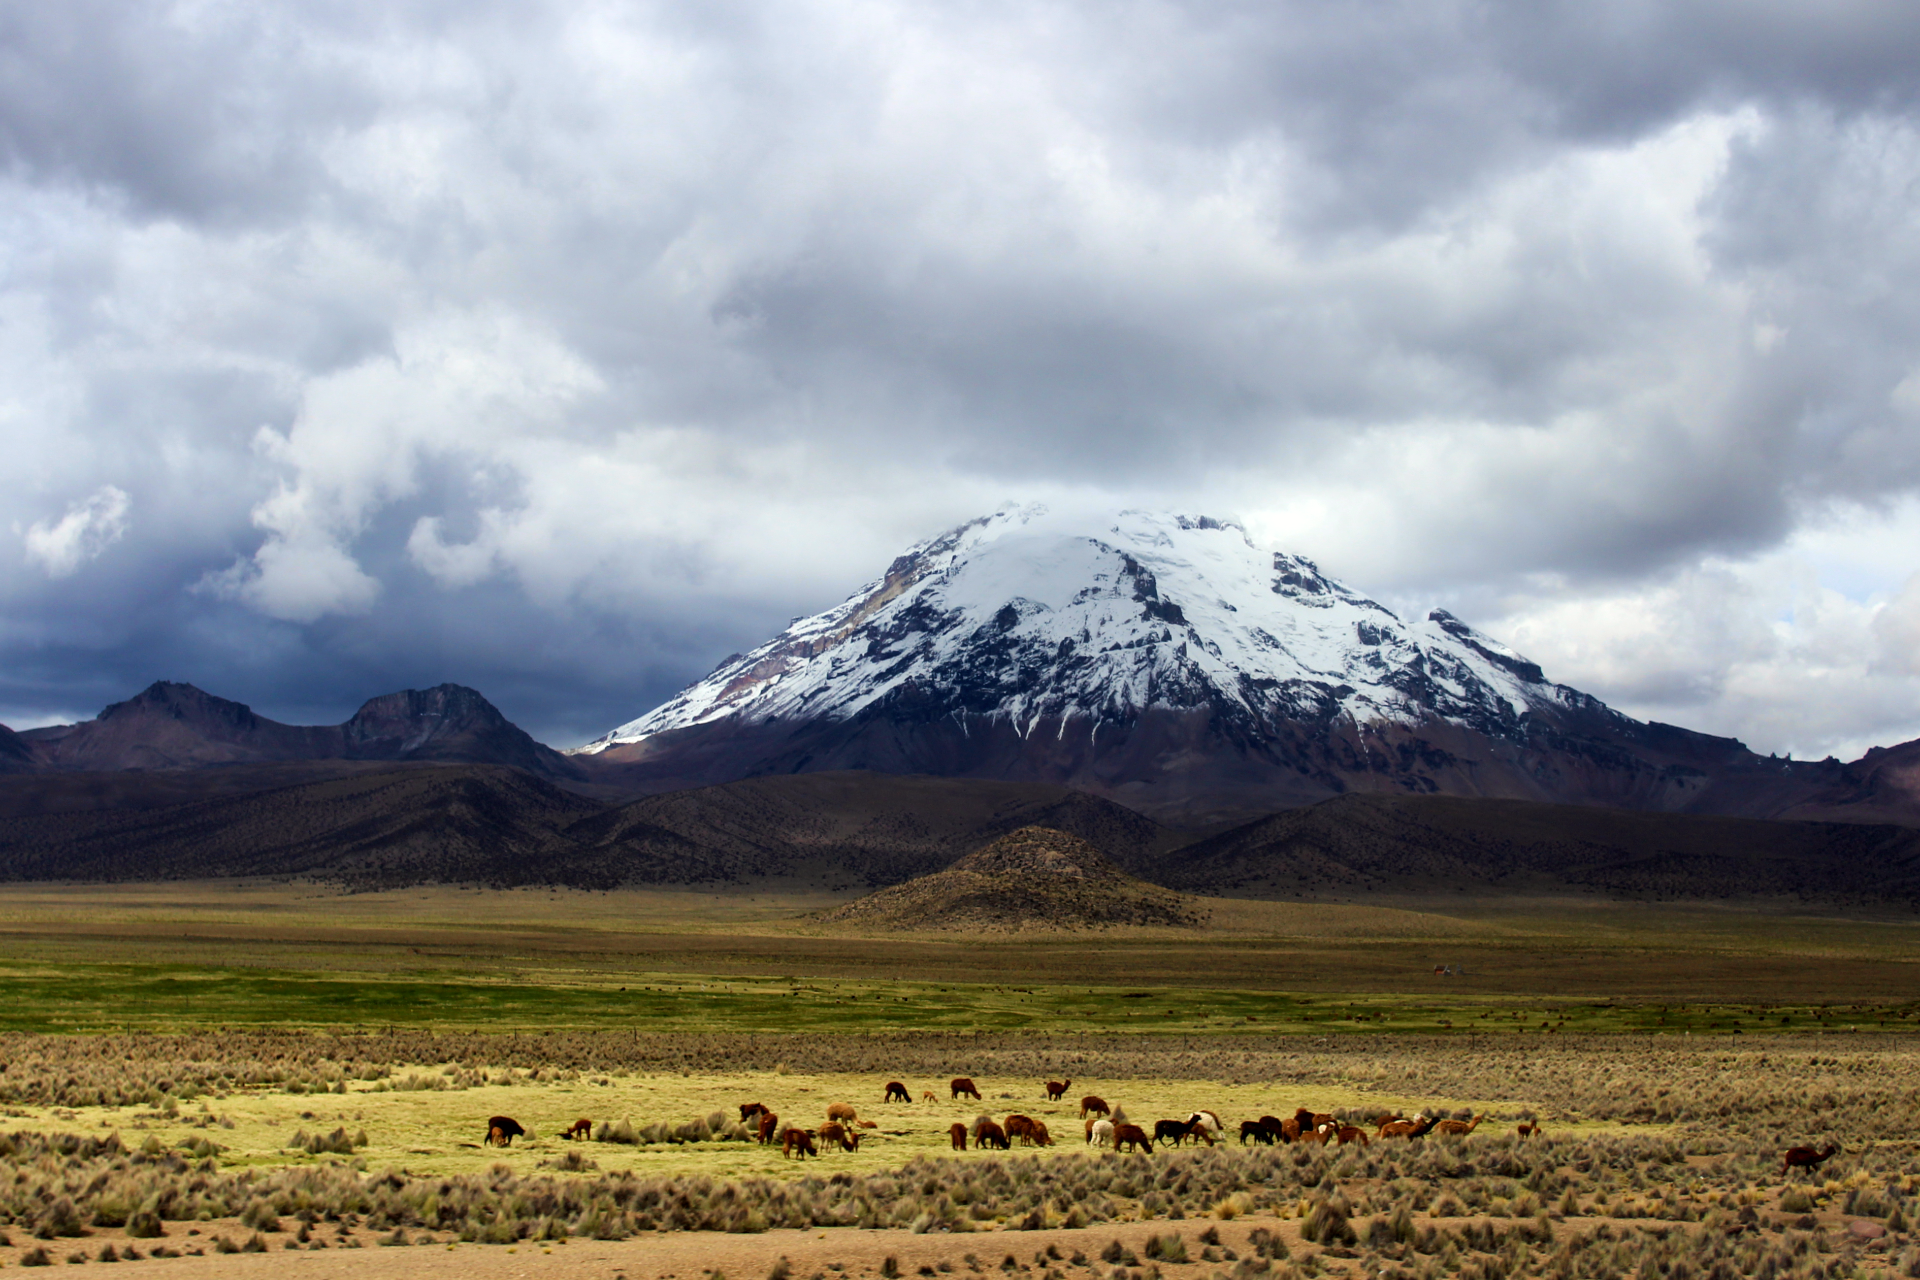 Trip to South America no. 69 Chile&Bolivia - Volcanoes at the border